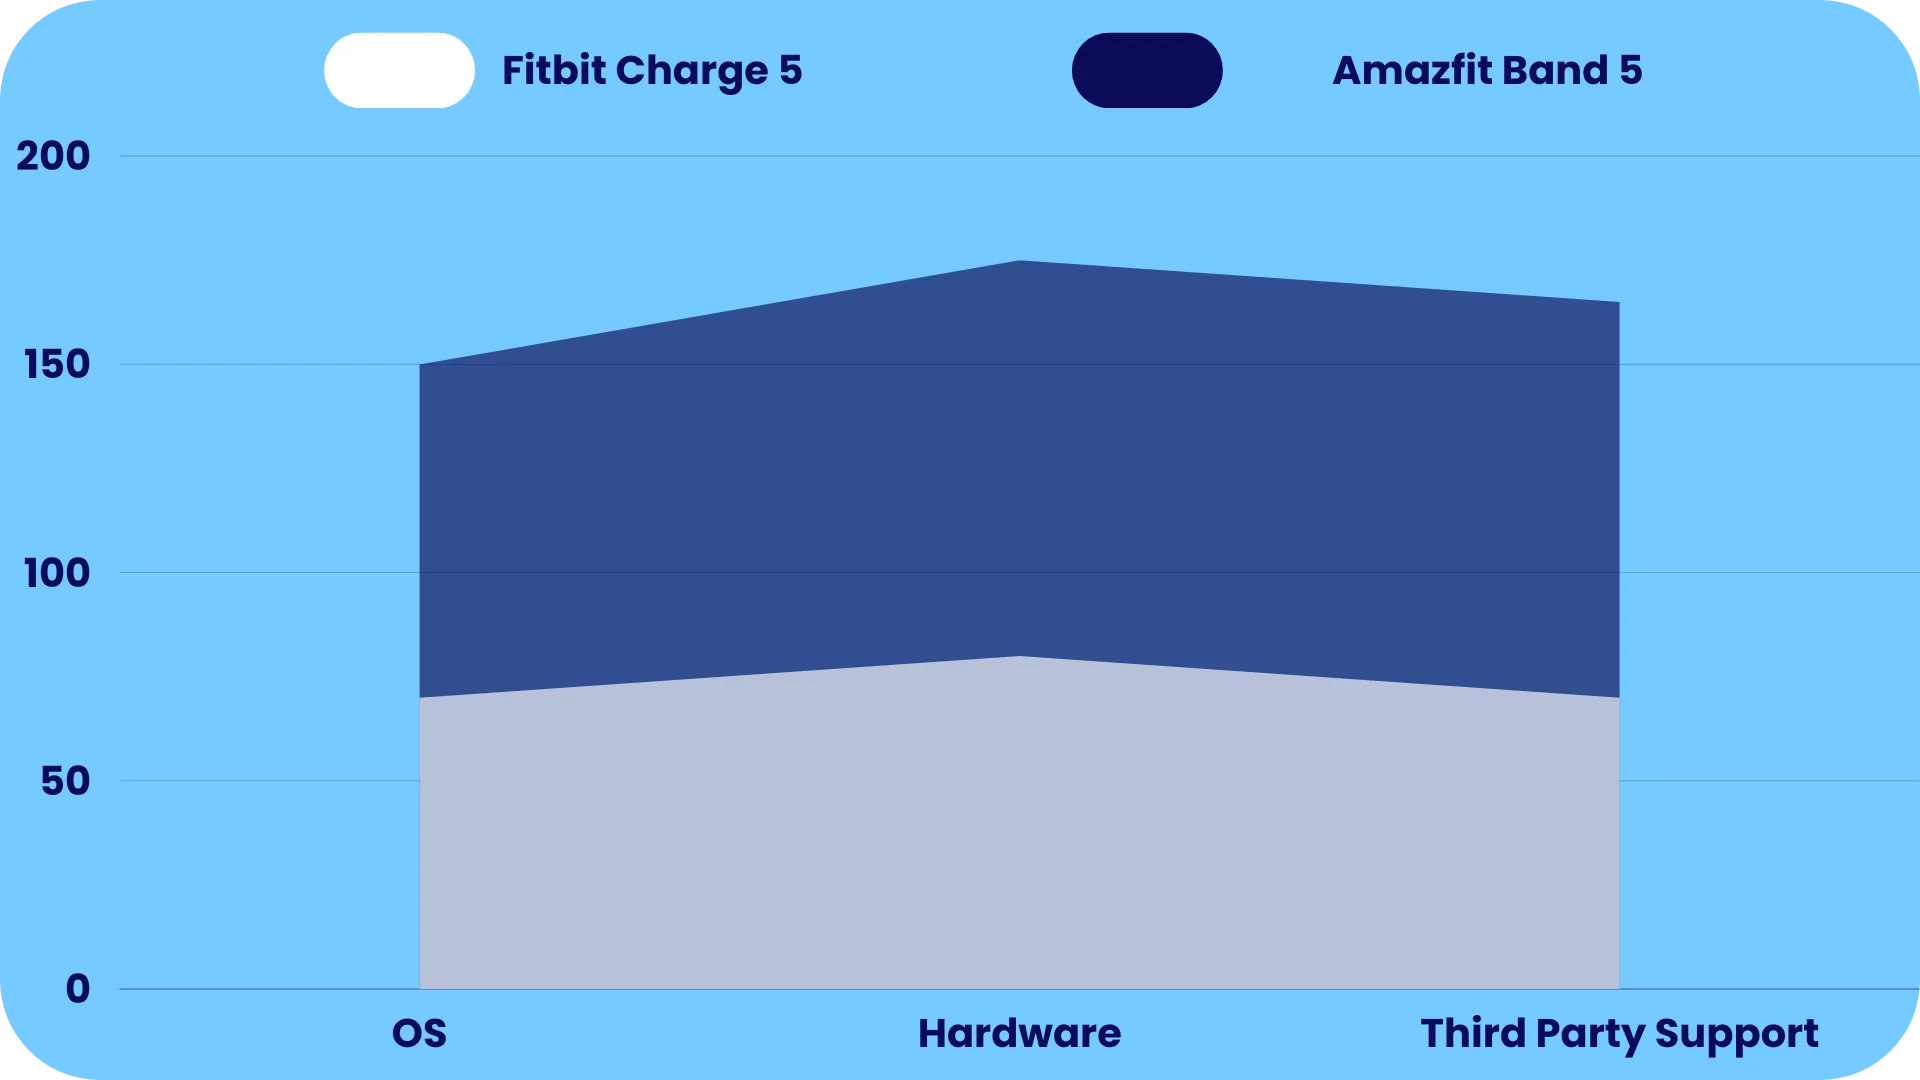 Wits Comparison of Fitbit Charge 5 & Amazfit Band 5